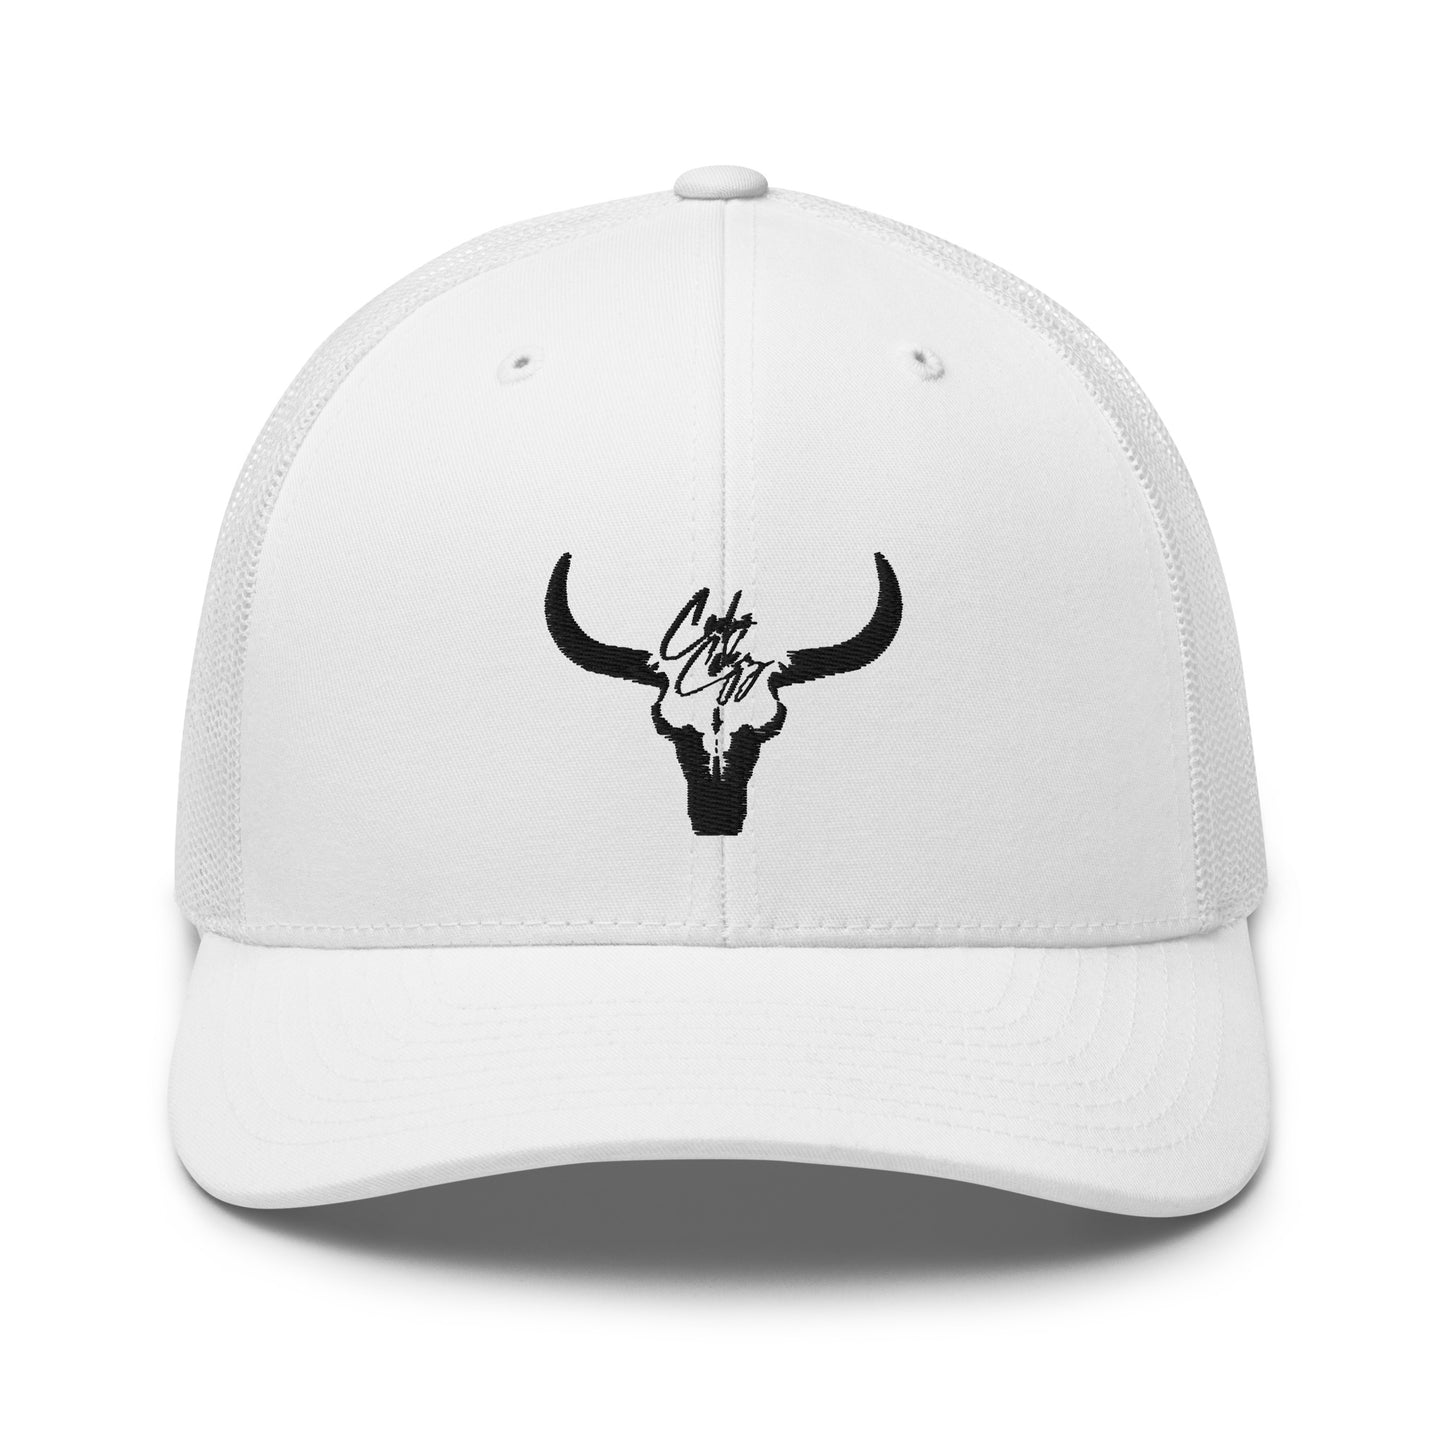 "White Out" Cody Cozz - Trucker